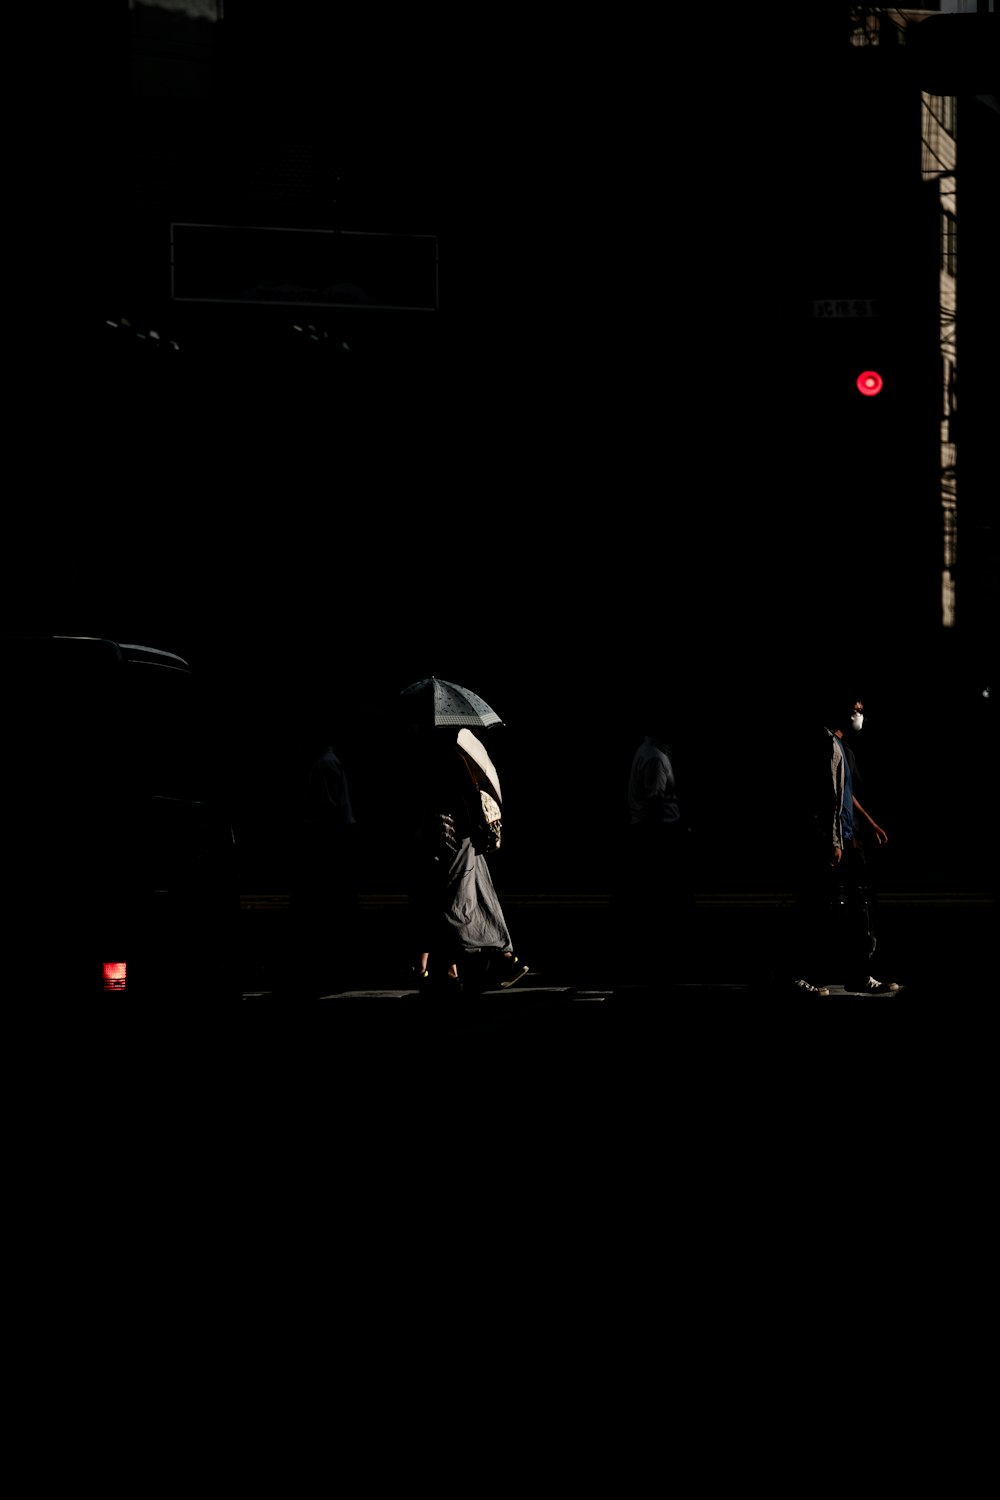 silhouette of person holding umbrella walking on street during night time